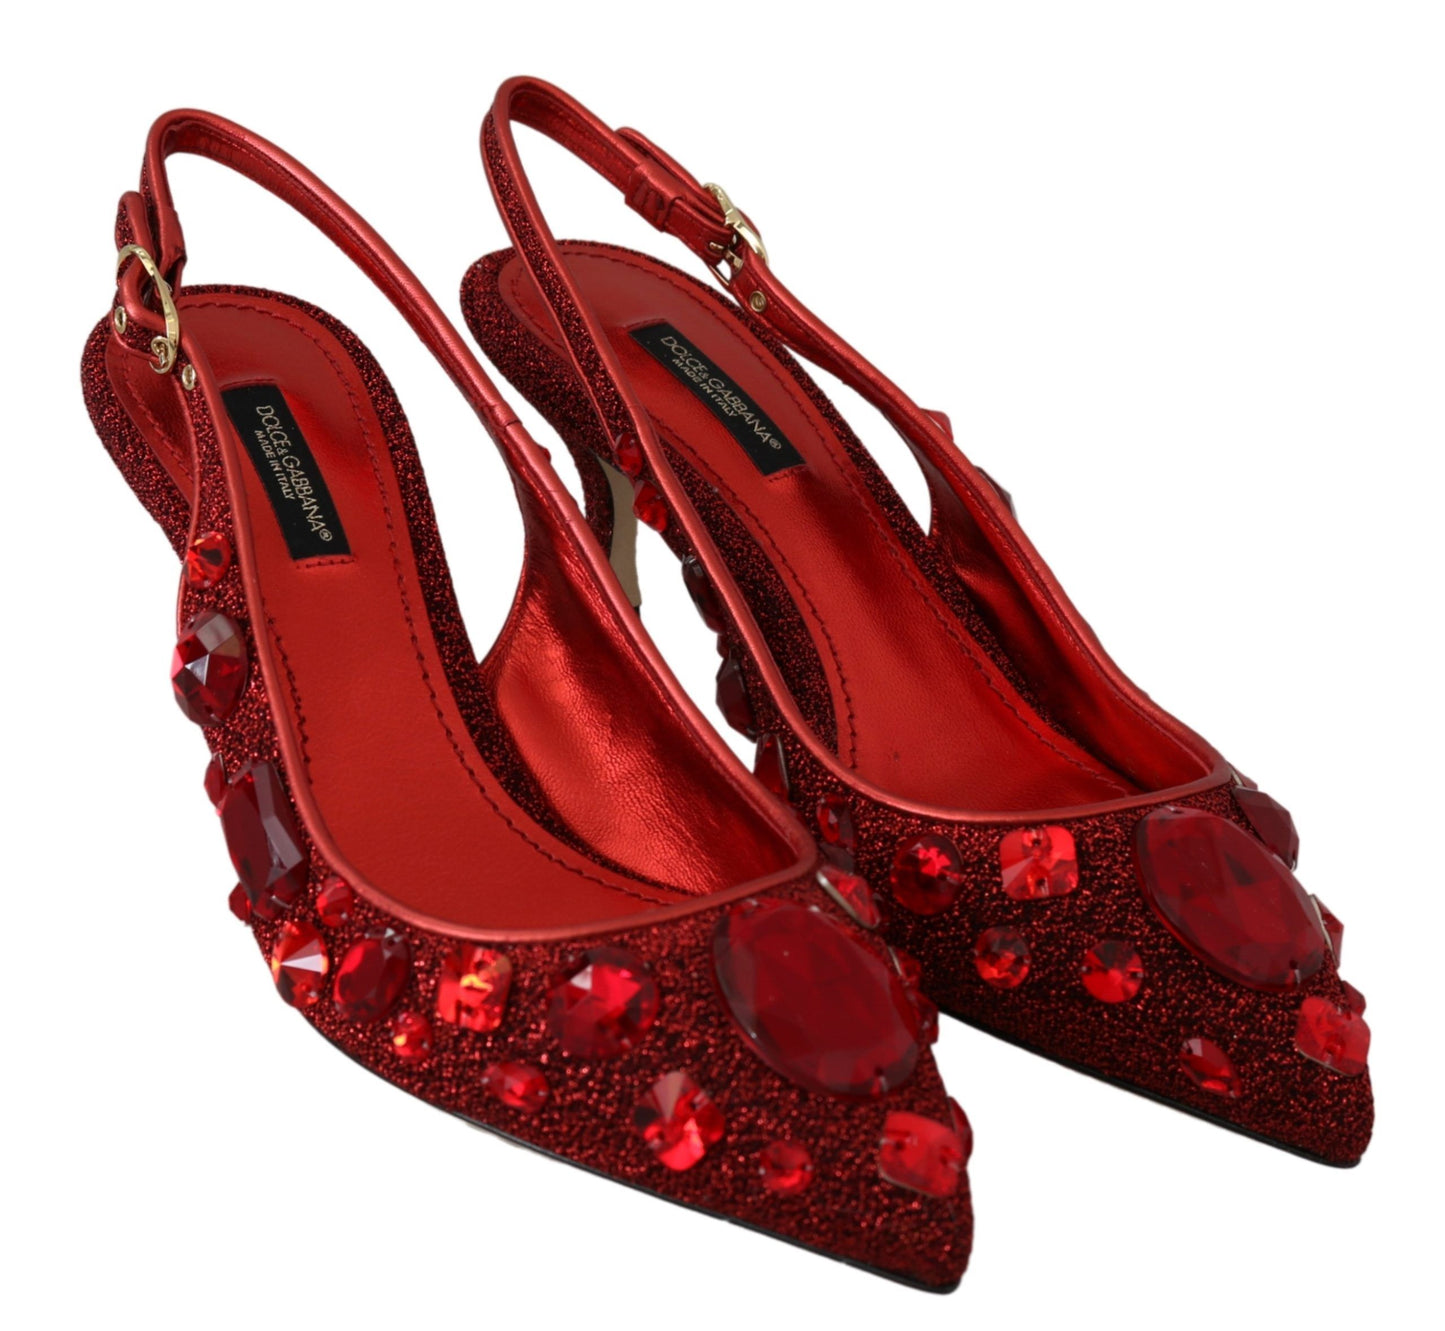 Radiant Red Slingback Pumps with Crystal Motifs